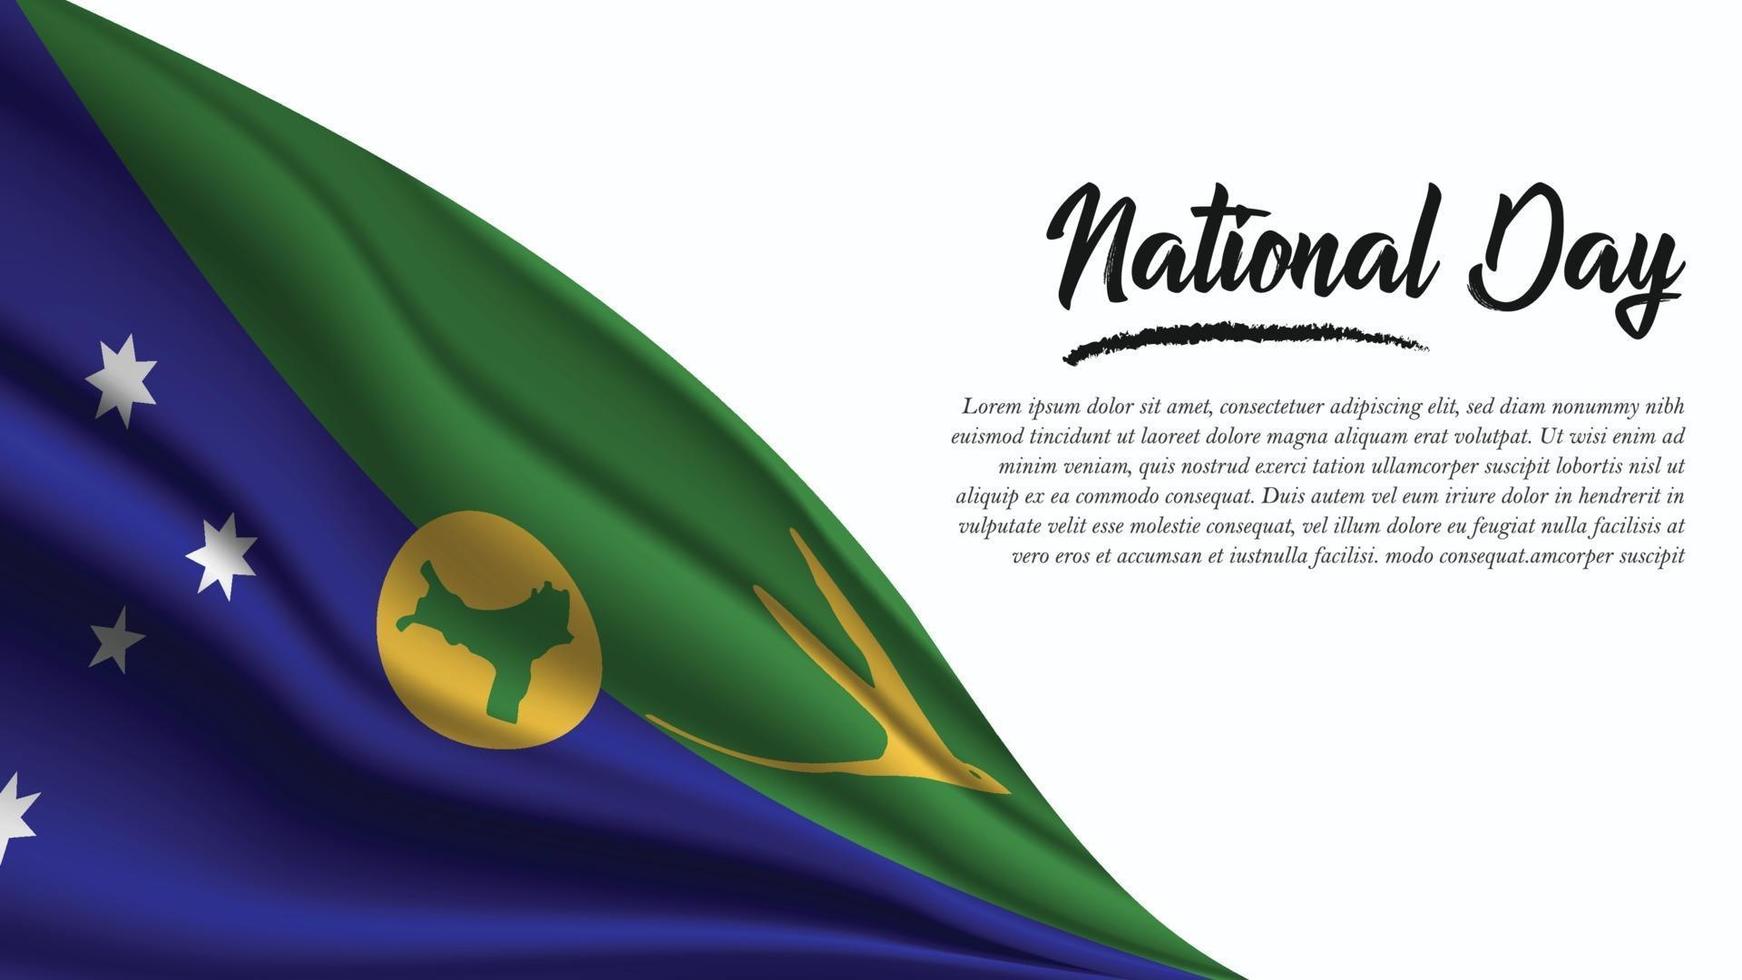 National Day Banner with Christmas Islands Flag background vector